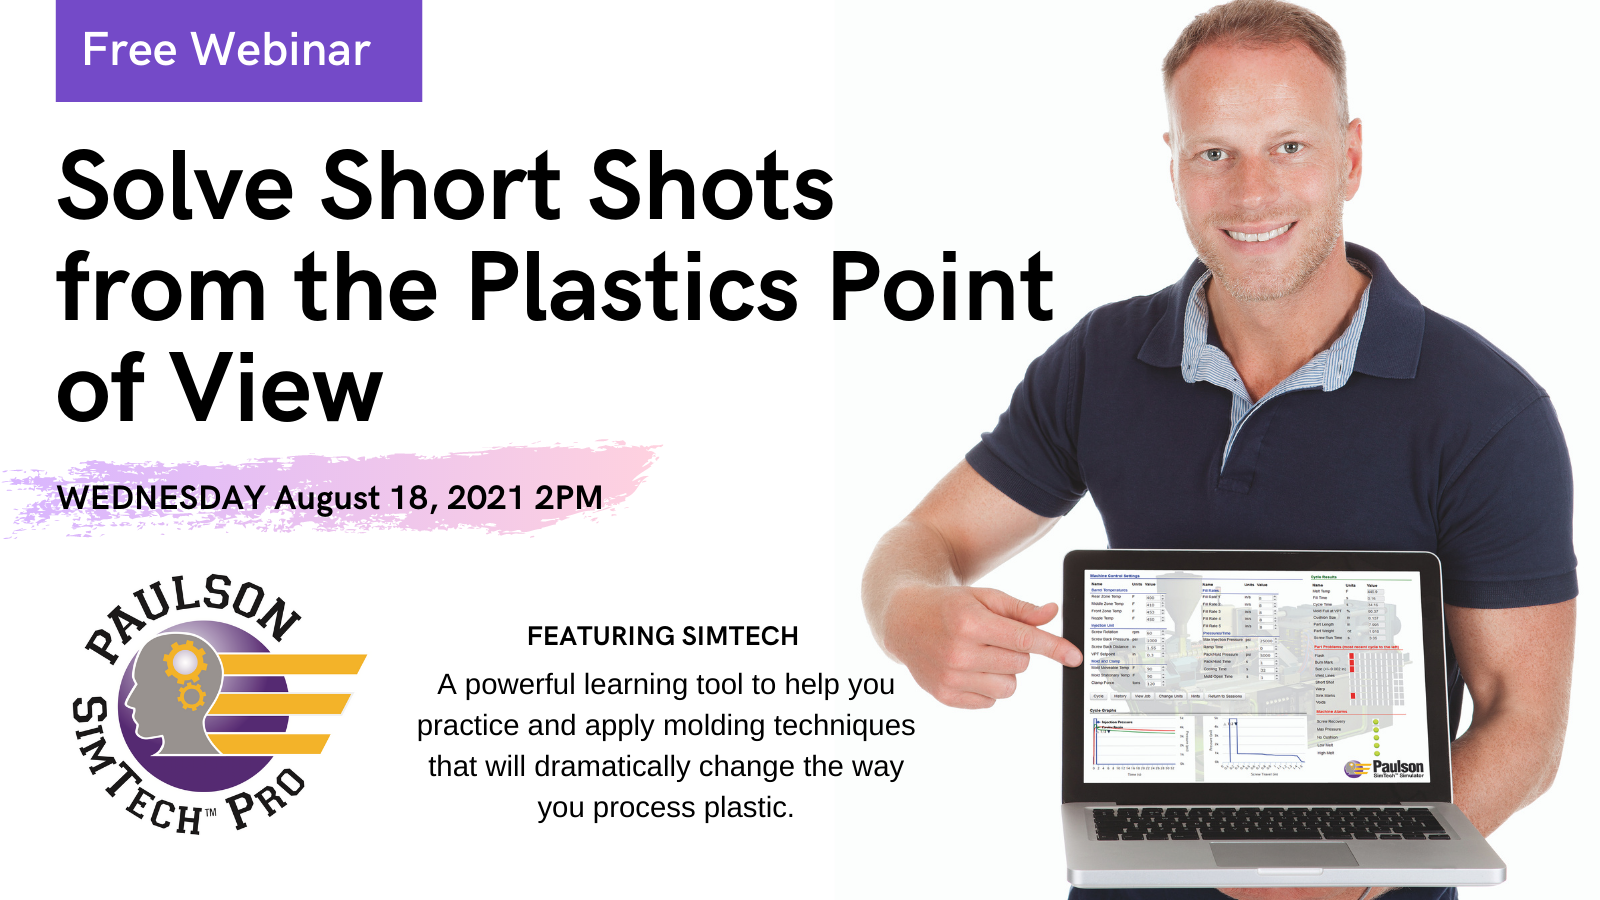 Webinar: How to Solve Short Shots from the Plastics Point of View